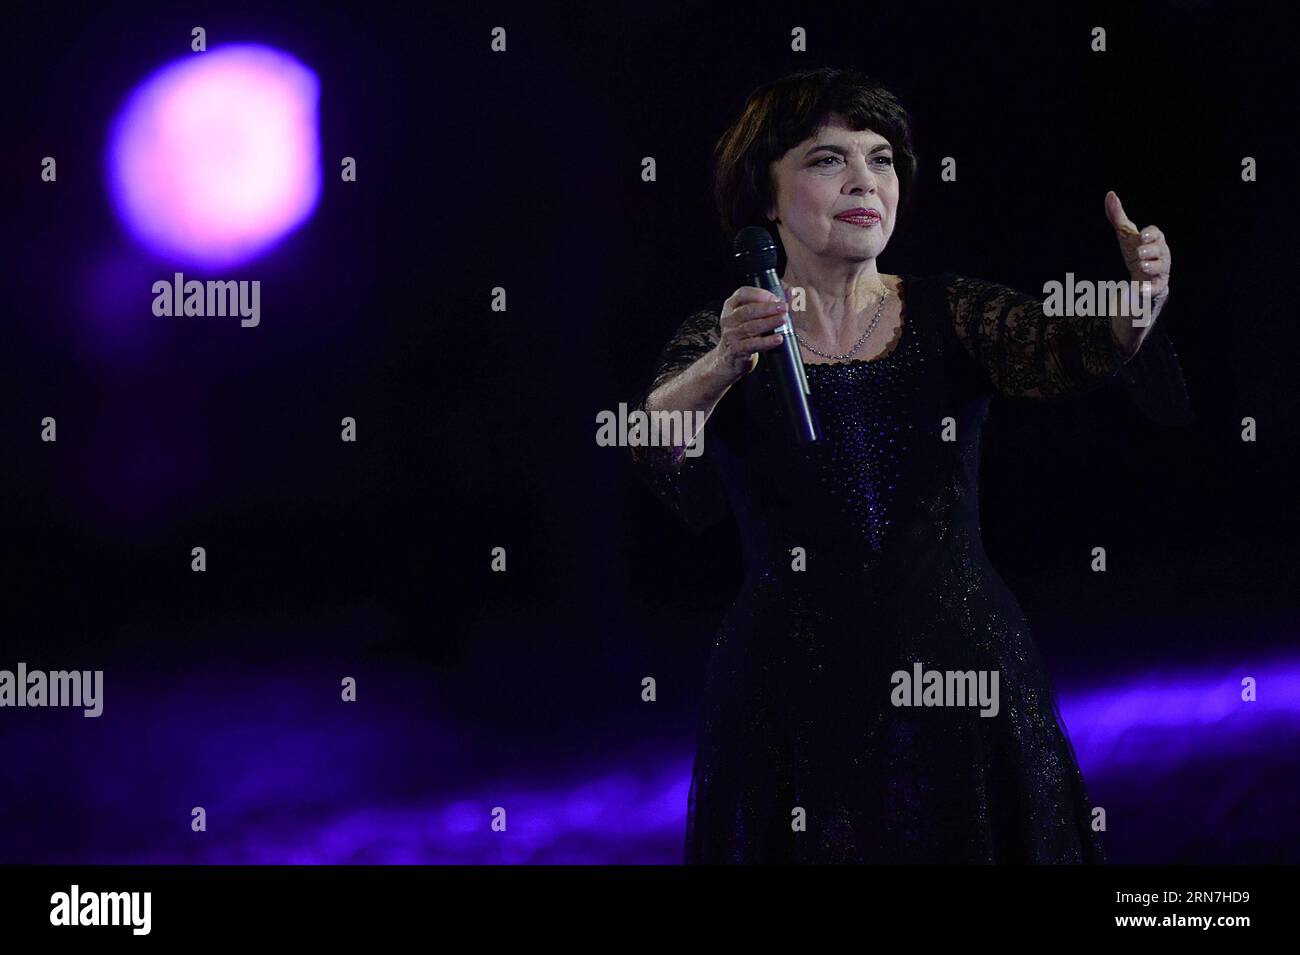 (150907) -- MOSCOW, Sept. 7, 2015 -- French singer Mireille Mathieu performs during the Spasskaya Tower International Military Music Festival in Moscow, Russia, on Sept. 7, 2015. Combined orchestra of all participants perform during the 8th International Military Music Festival Spasskaya Tower held here on Monday. ) RUSSIA-MOSCOW-MILITARY-BAND-FESTIVAL PavelxBednyakov PUBLICATIONxNOTxINxCHN   150907 Moscow Sept 7 2015 French Singer Mireille Mathieu performs during The Fun Kaya Tower International Military Music Festival in Moscow Russia ON Sept 7 2015 Combined Orchestra of All Participants per Stock Photo